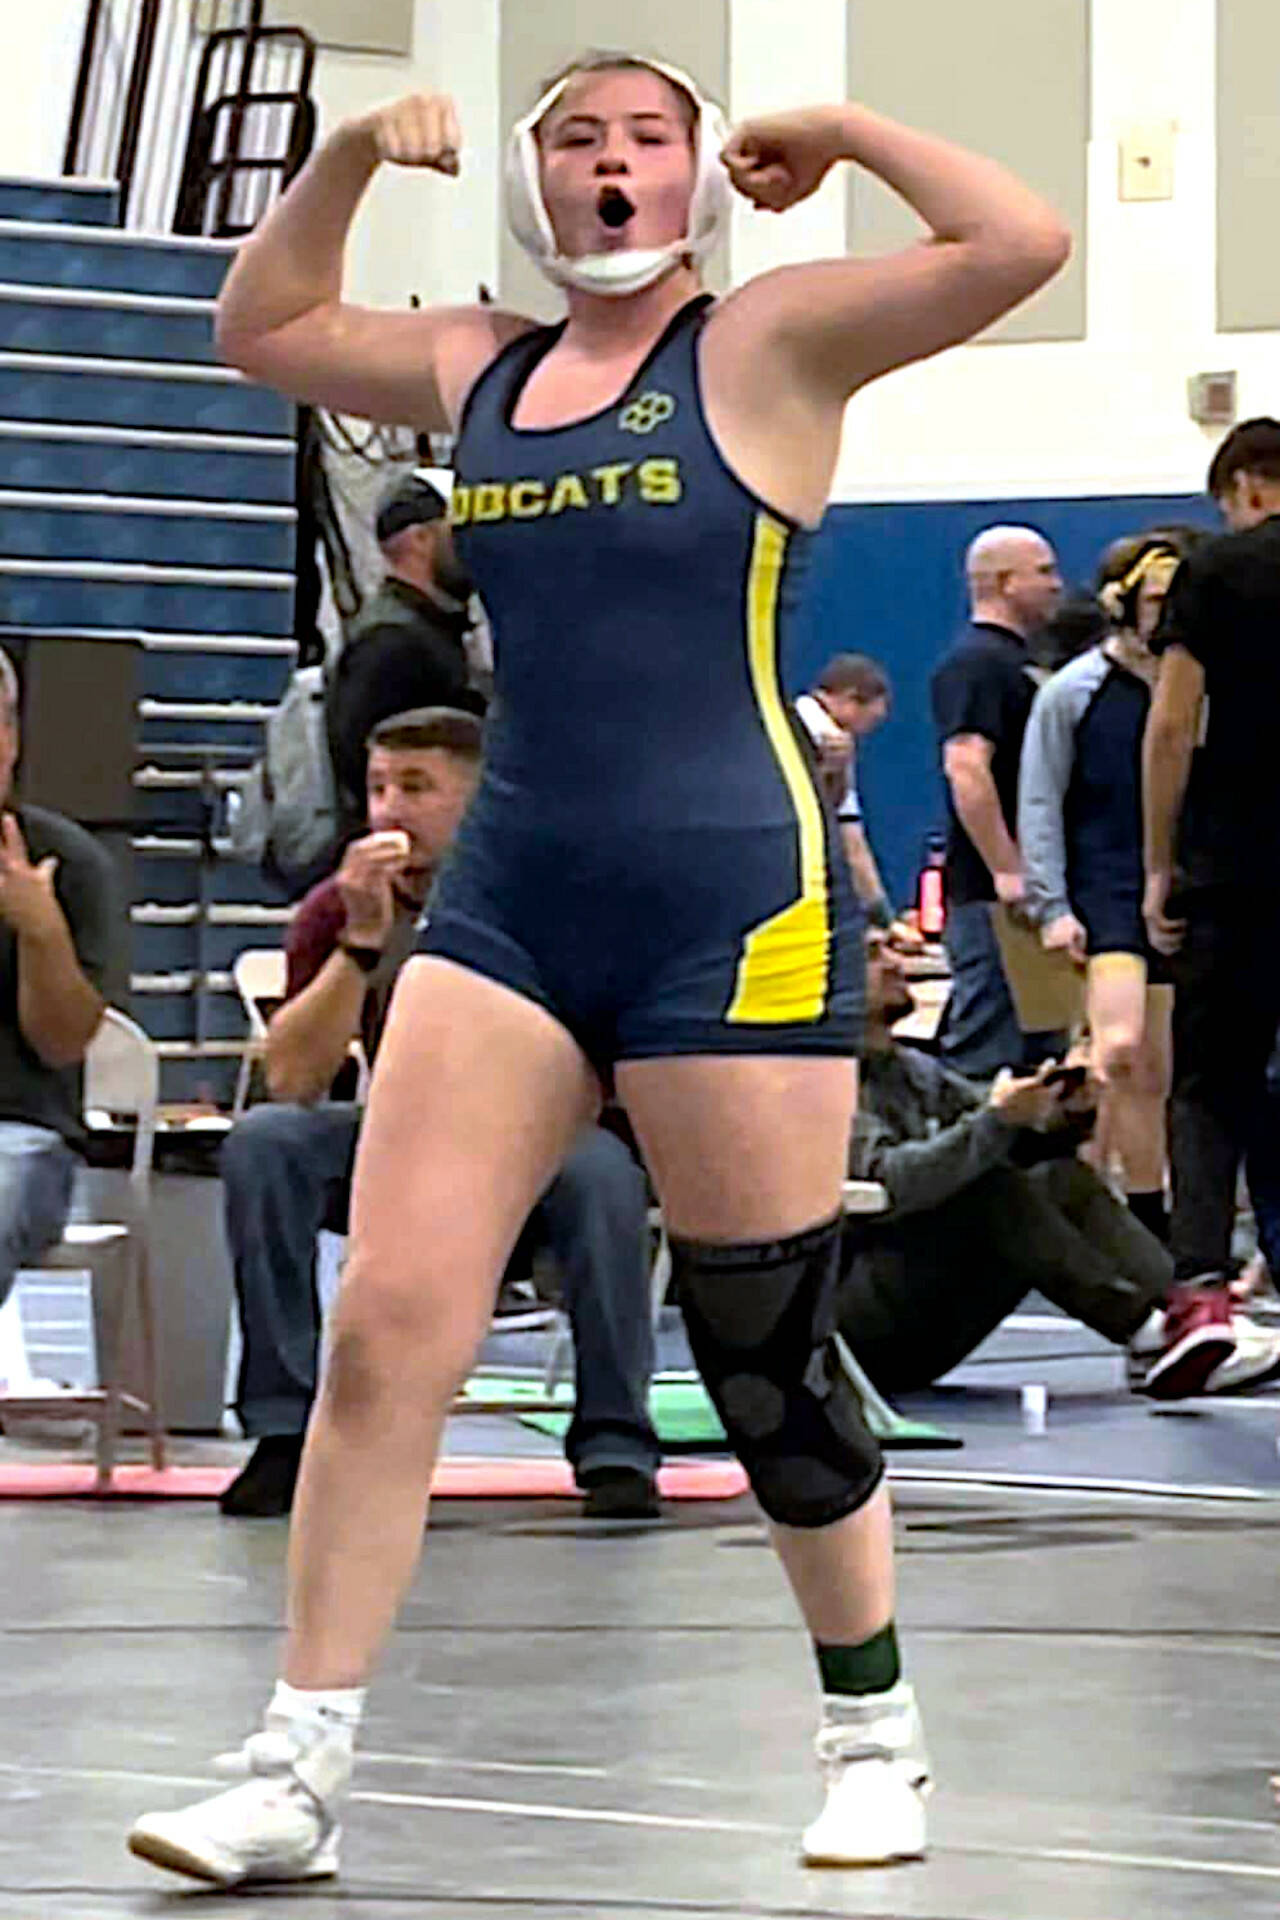 SUBMITTED PHOTO Aberdeen’s Kya Roundtree celebrates after winning the 170-pound championship at the River Ridge Rumble on Saturday at River Ridge High School.